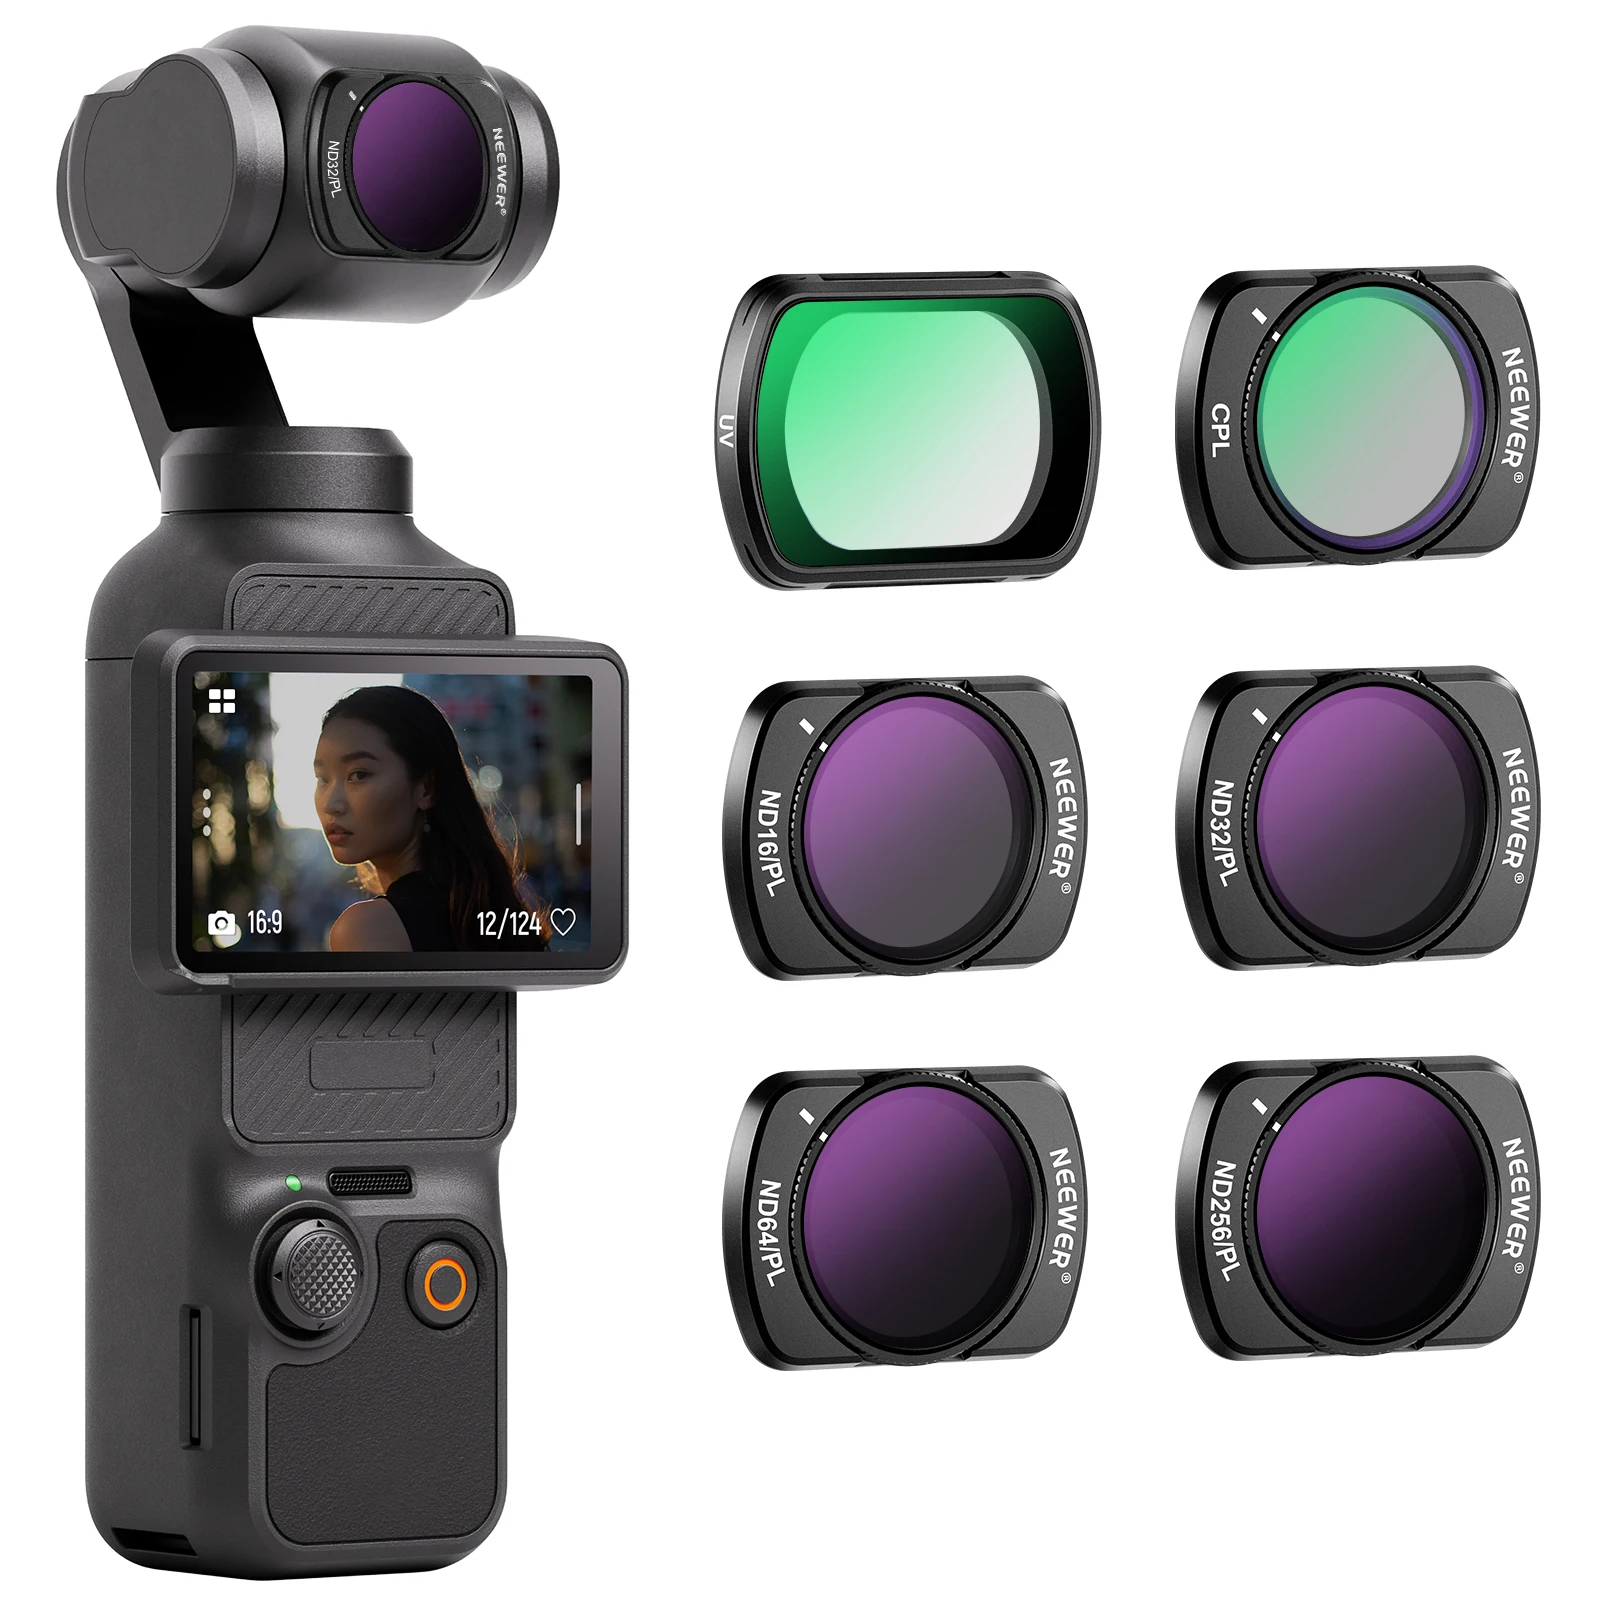 

NEEWER Magnetic ND/CPL Filter Set Compatible with DJI OSMO Pocket 3, 6 Pack UV CPL ND16/PL ND32/PL ND64/PL ND256/PL Polarizing